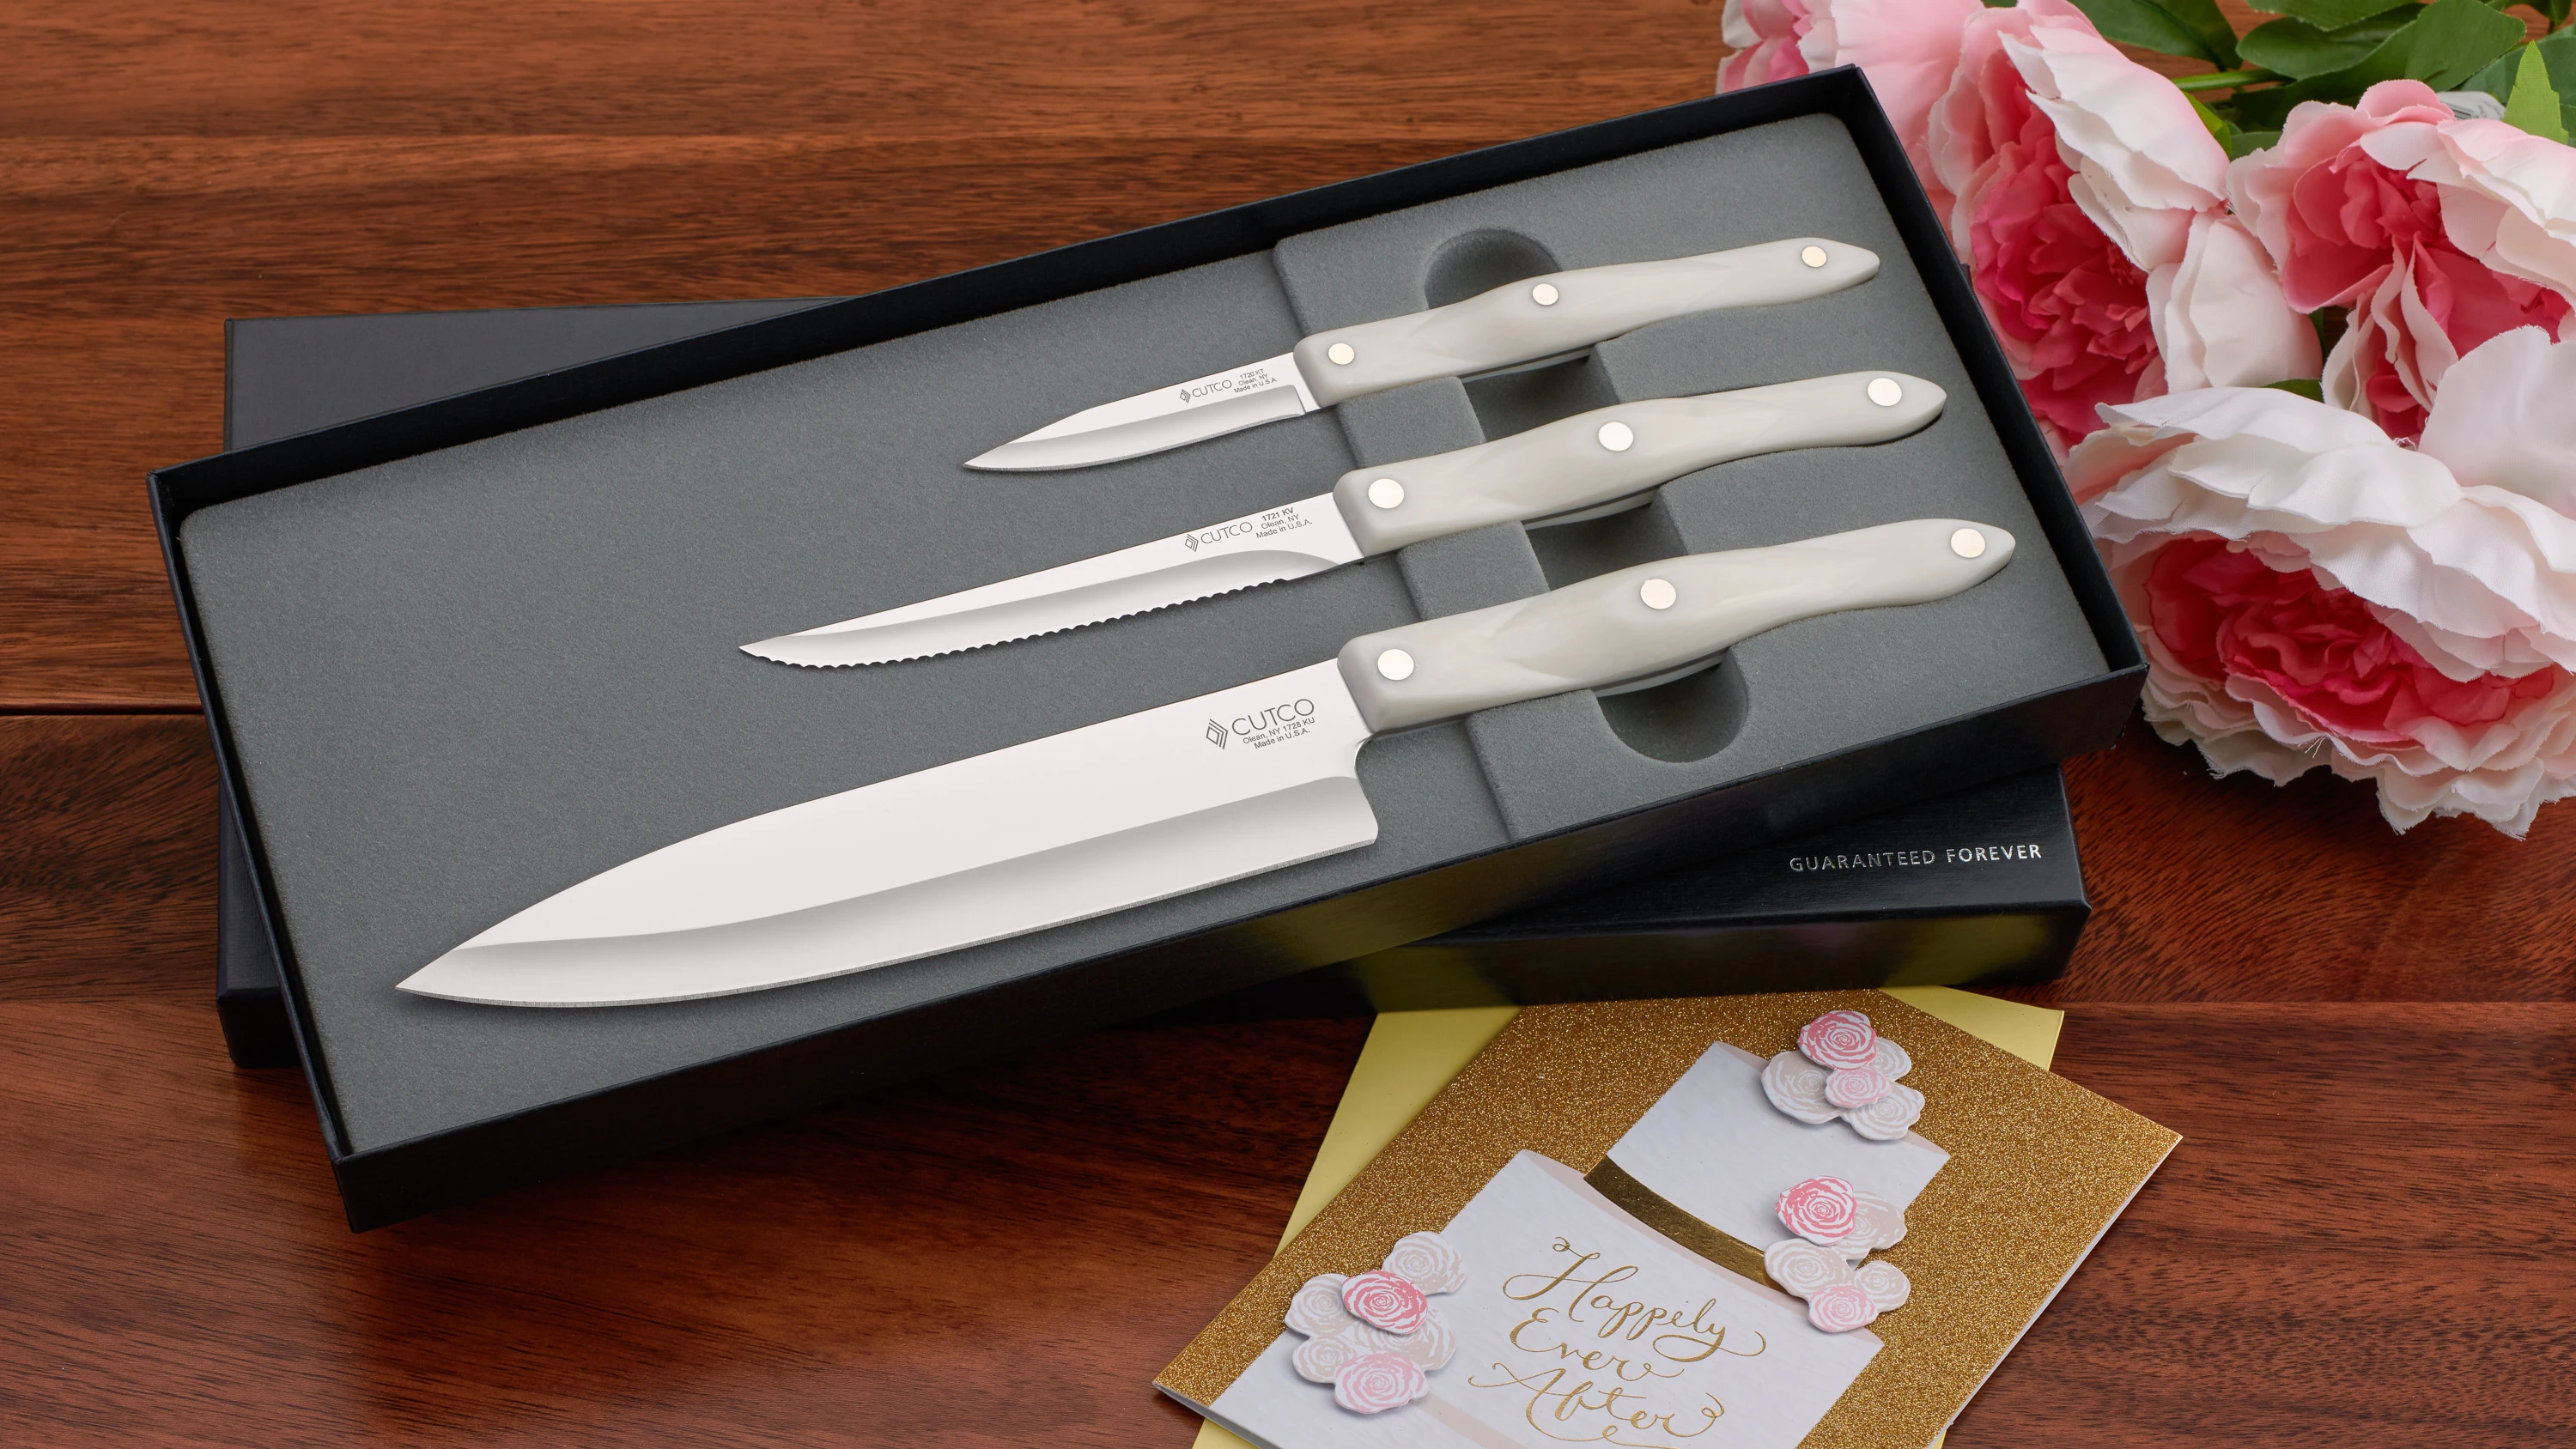 Cutco #1827 Kitchen Classics Boxed Knife Gift Set - Includes #1728 Petite Chef, #1721 Trimmer, and #1720 Paring Knife - Pearl White